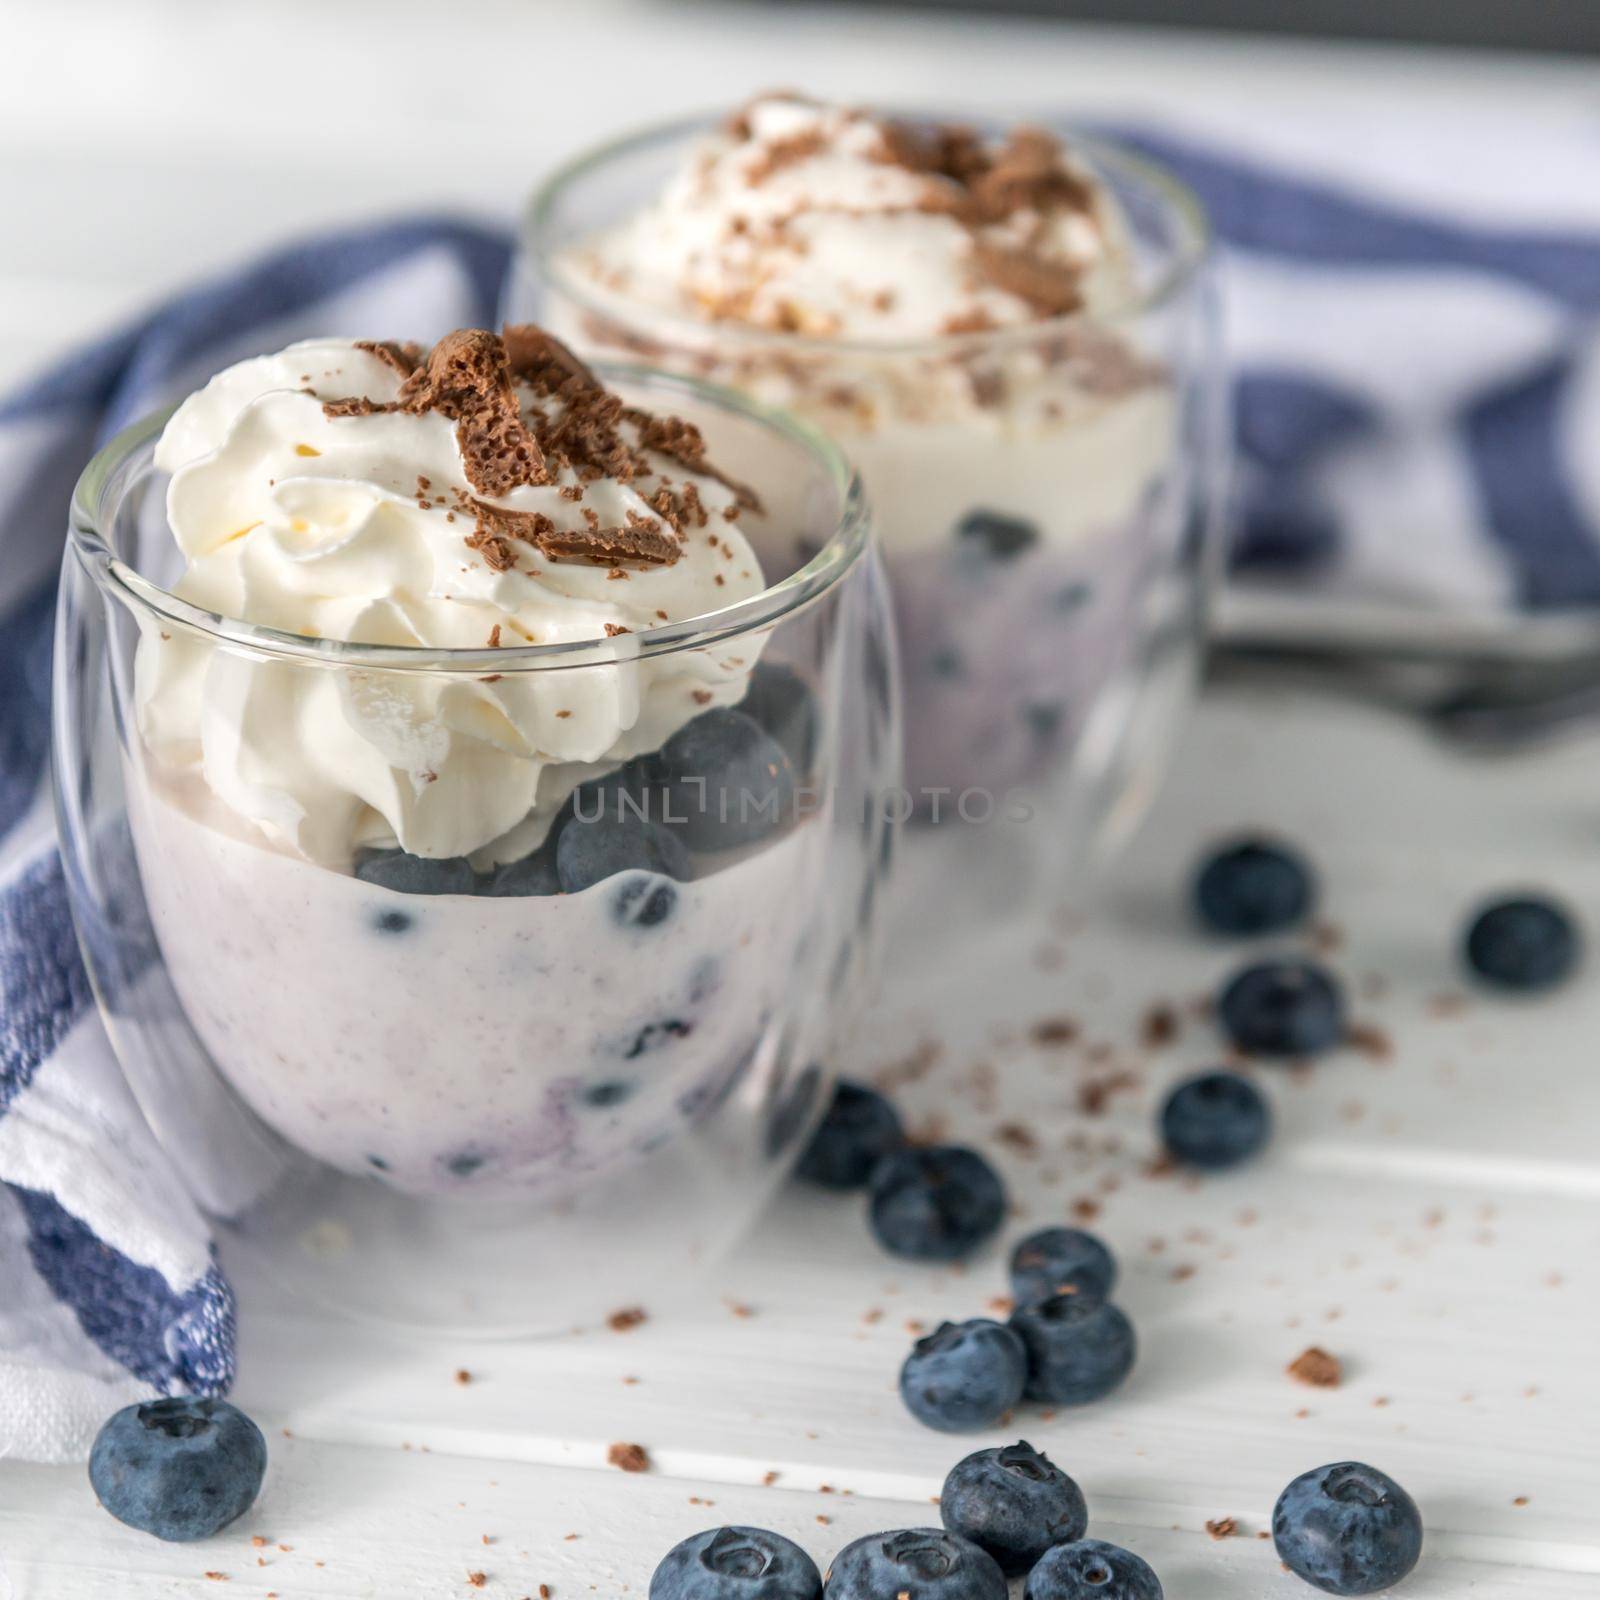 Dessert from yogurt with blueberries and chocolate by tan4ikk1